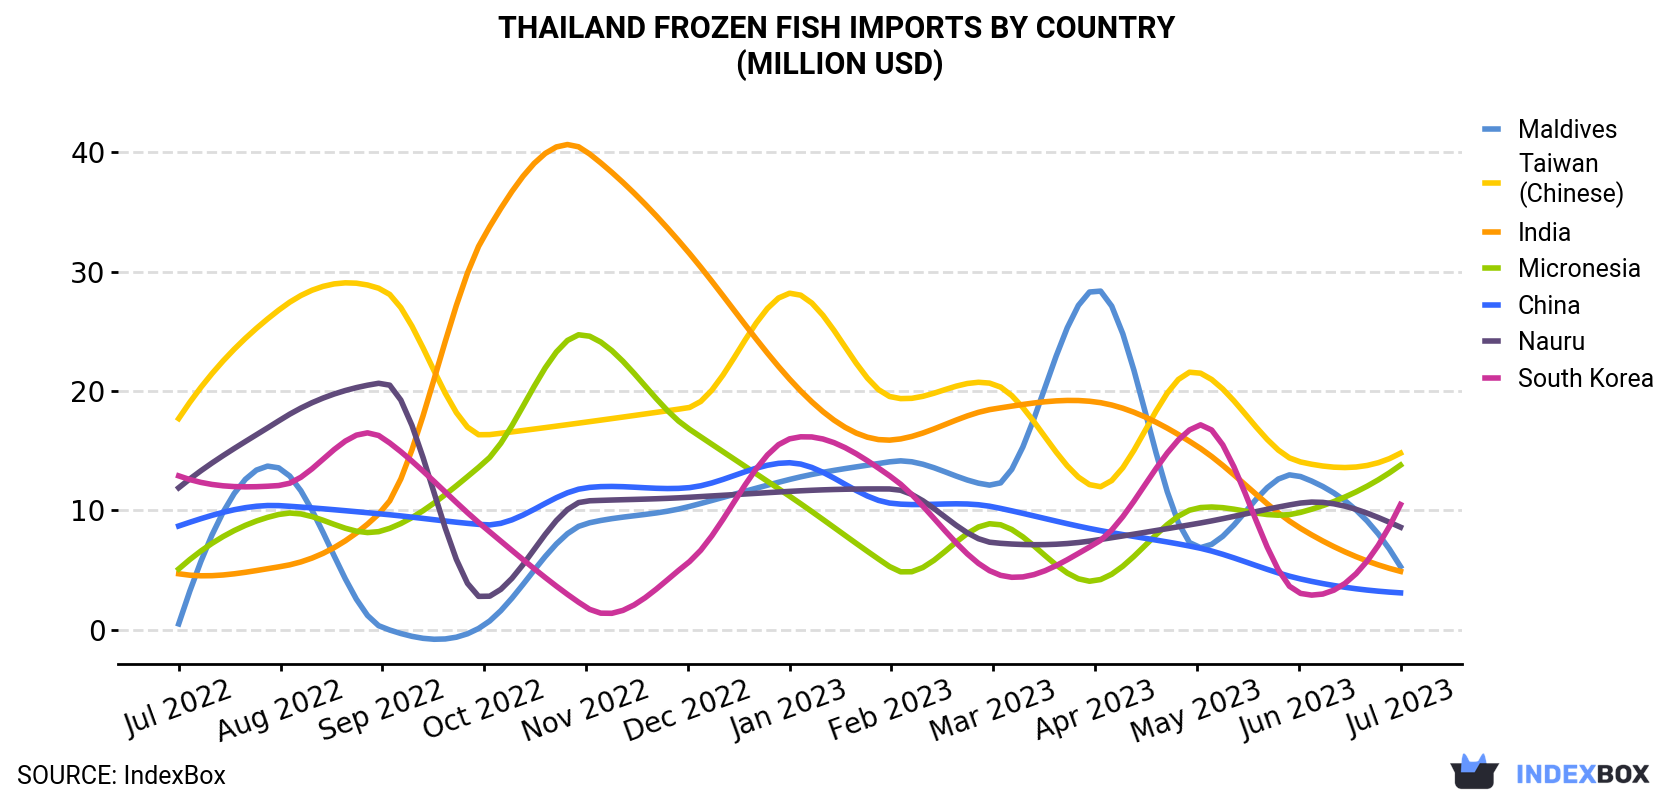 Thailand Frozen Fish Imports By Country (Million USD)